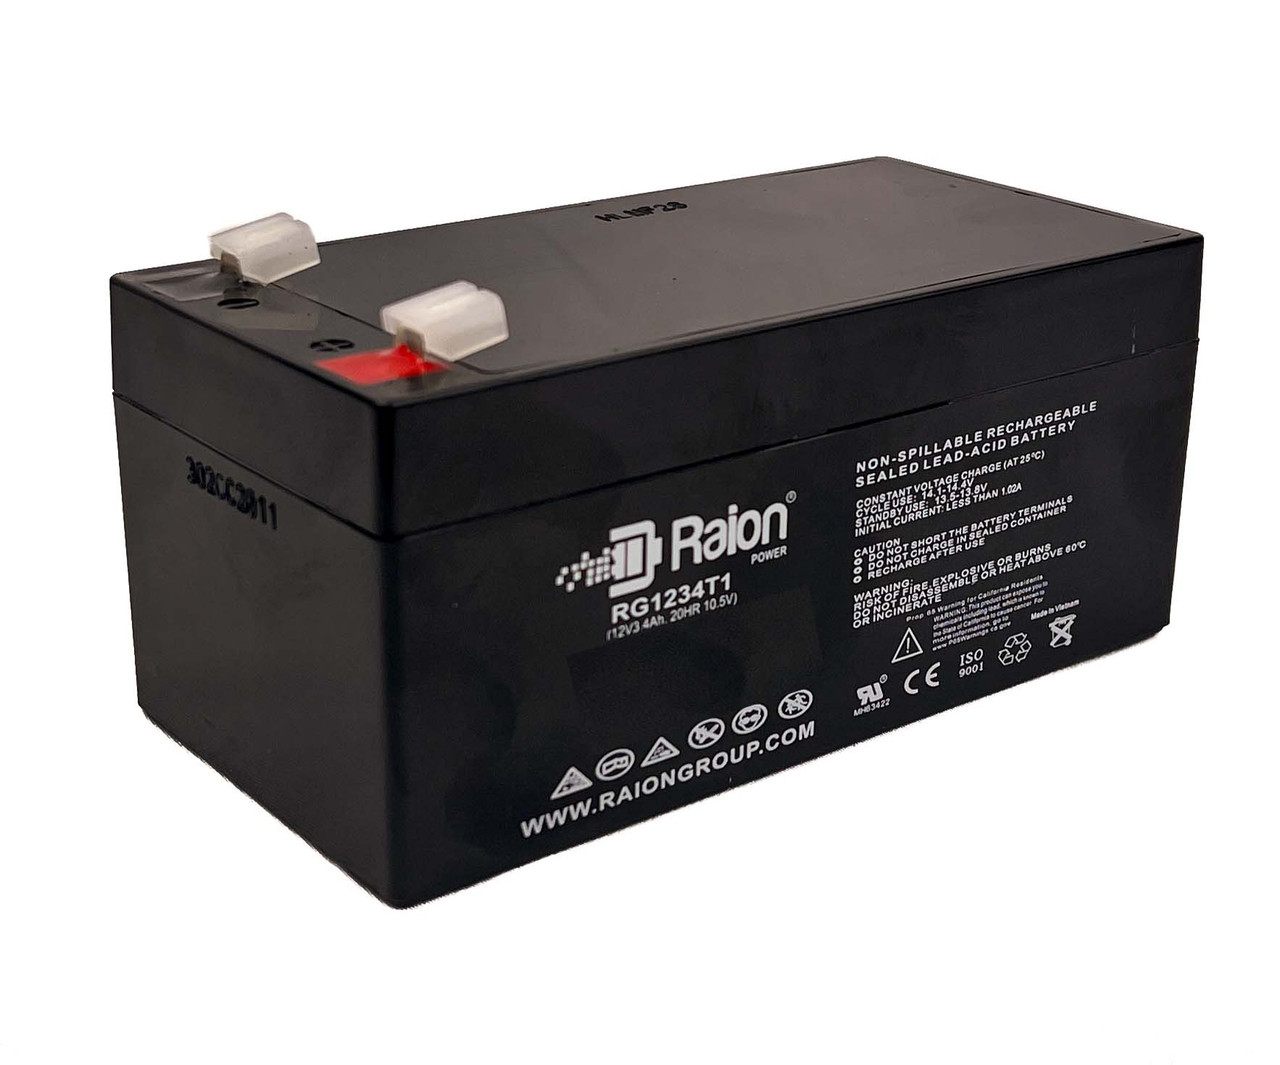 Raion Power 12V 3.4Ah Non-Spillable Replacement Battery for FAAM FTS 12-3.0